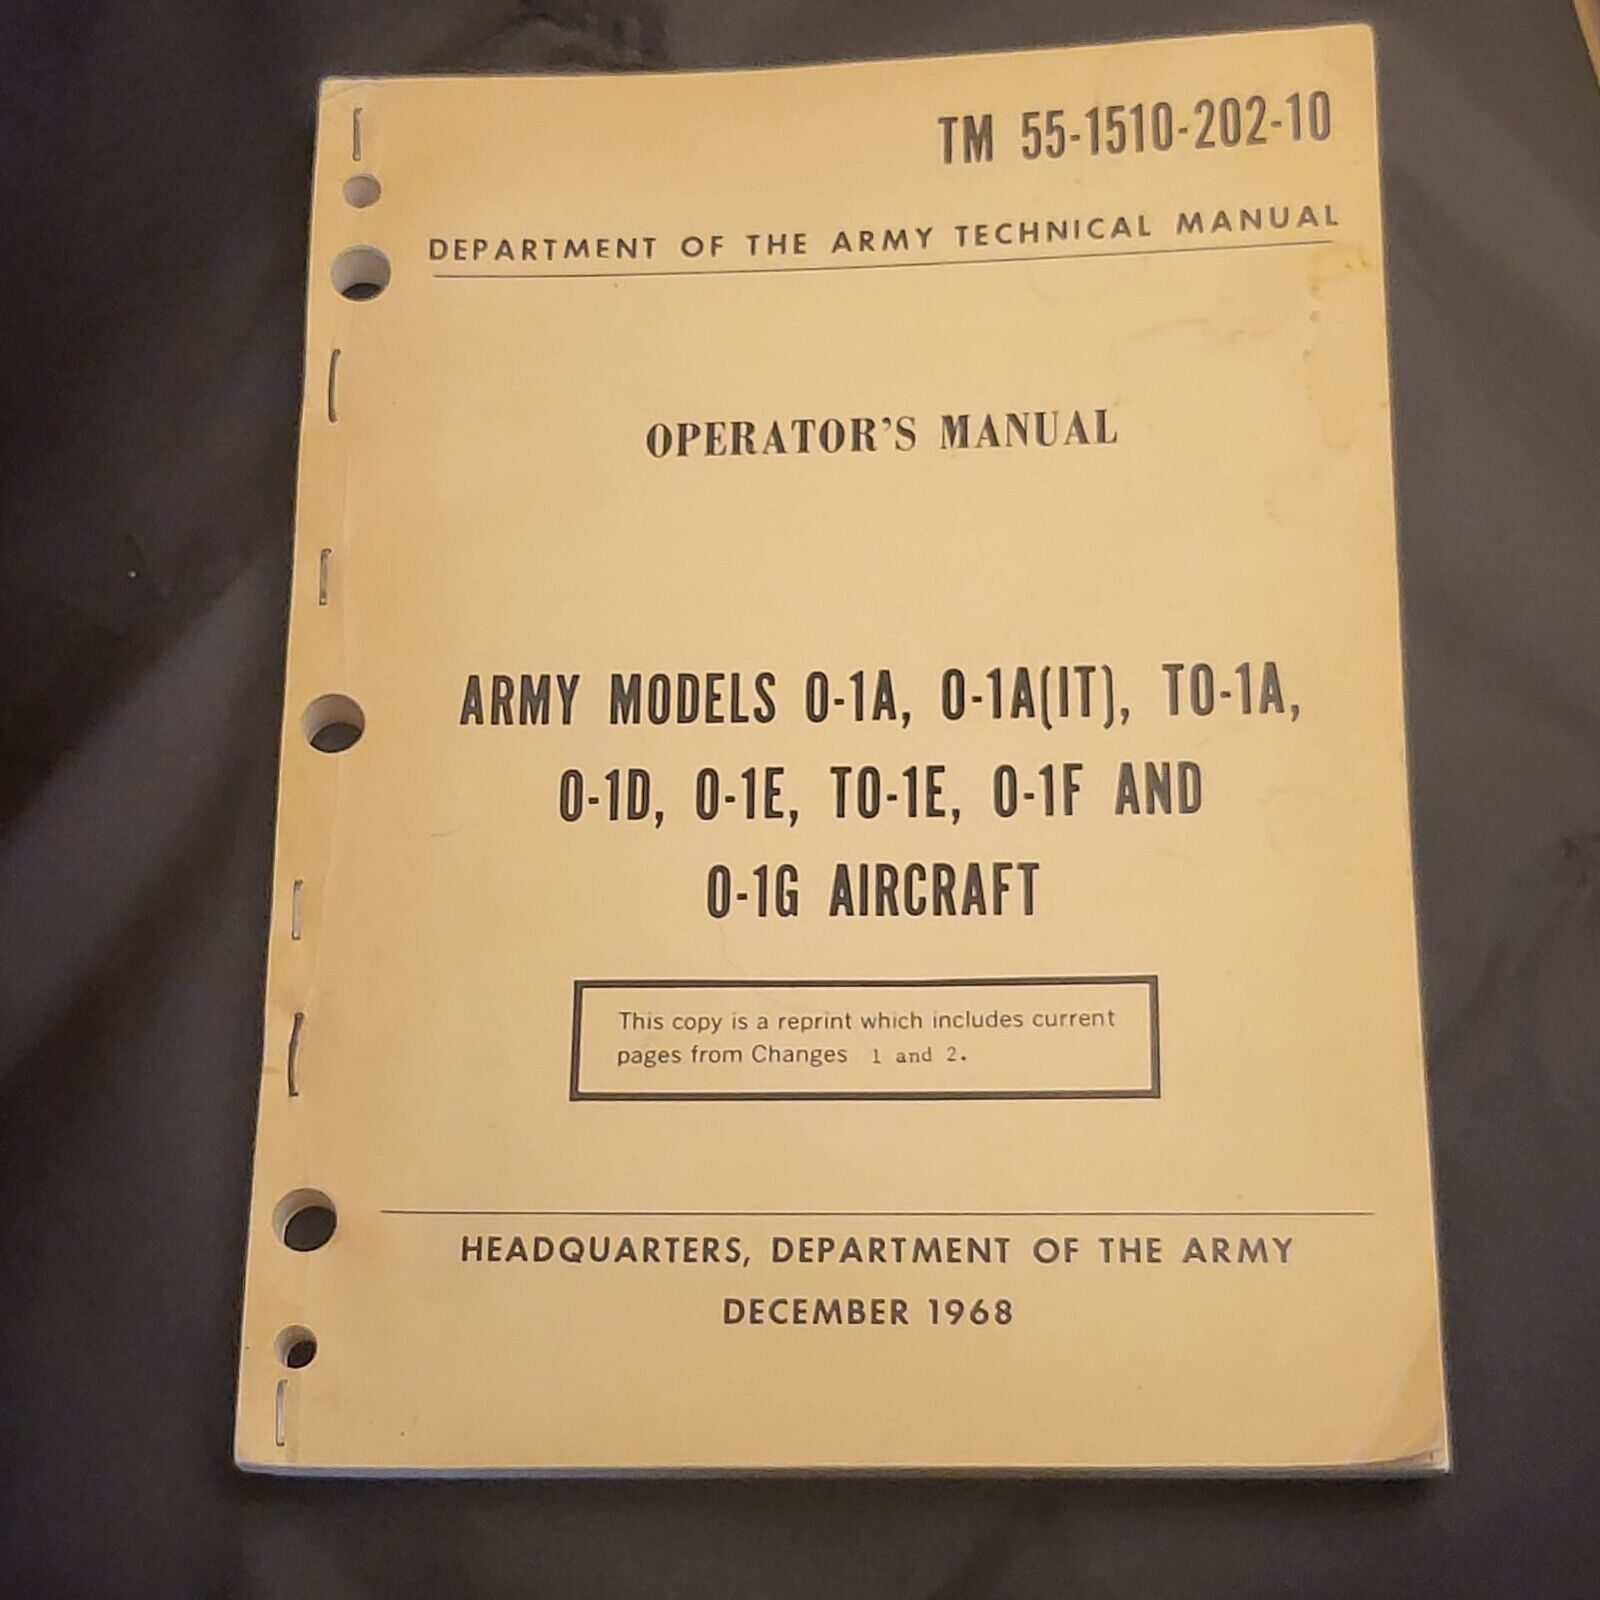 Department of the Army 0-1 Aircraft TM 55-1510-202-10 Operator's Manual HQ 1968